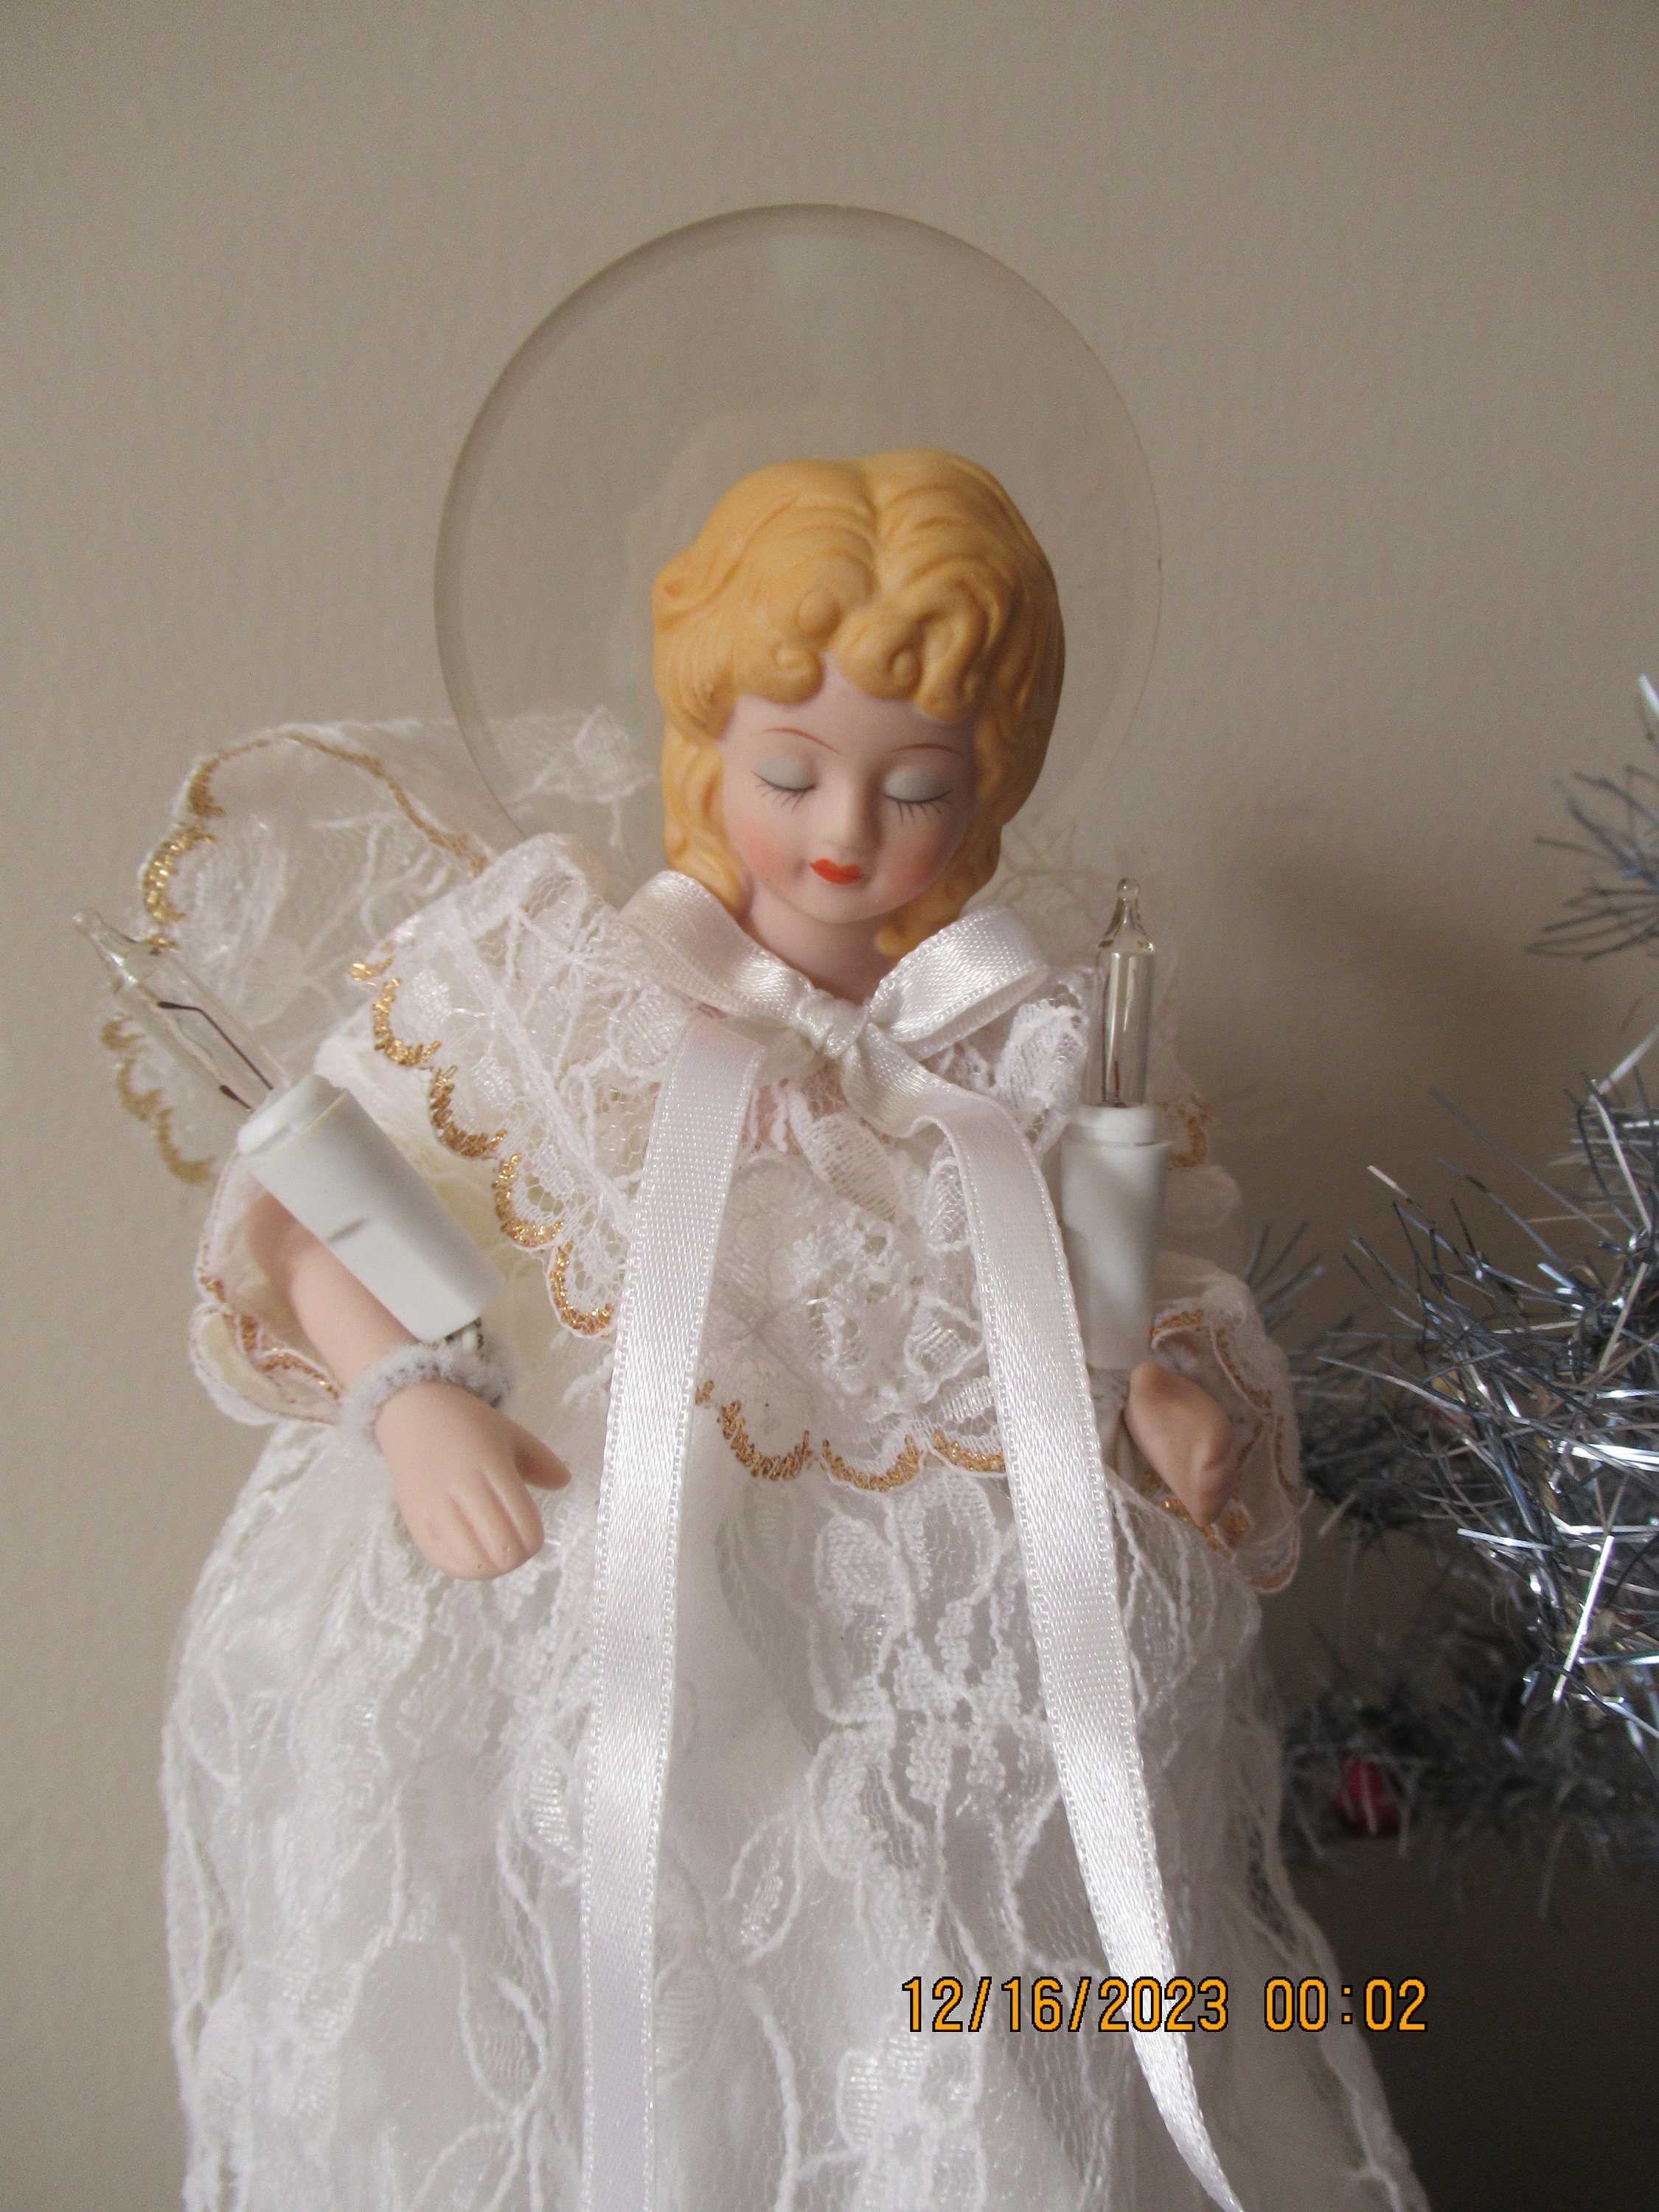 Vintage Straw Angel Gold Foil 13.5” Rustic Wood Christmas Tree Topper  Figurine*